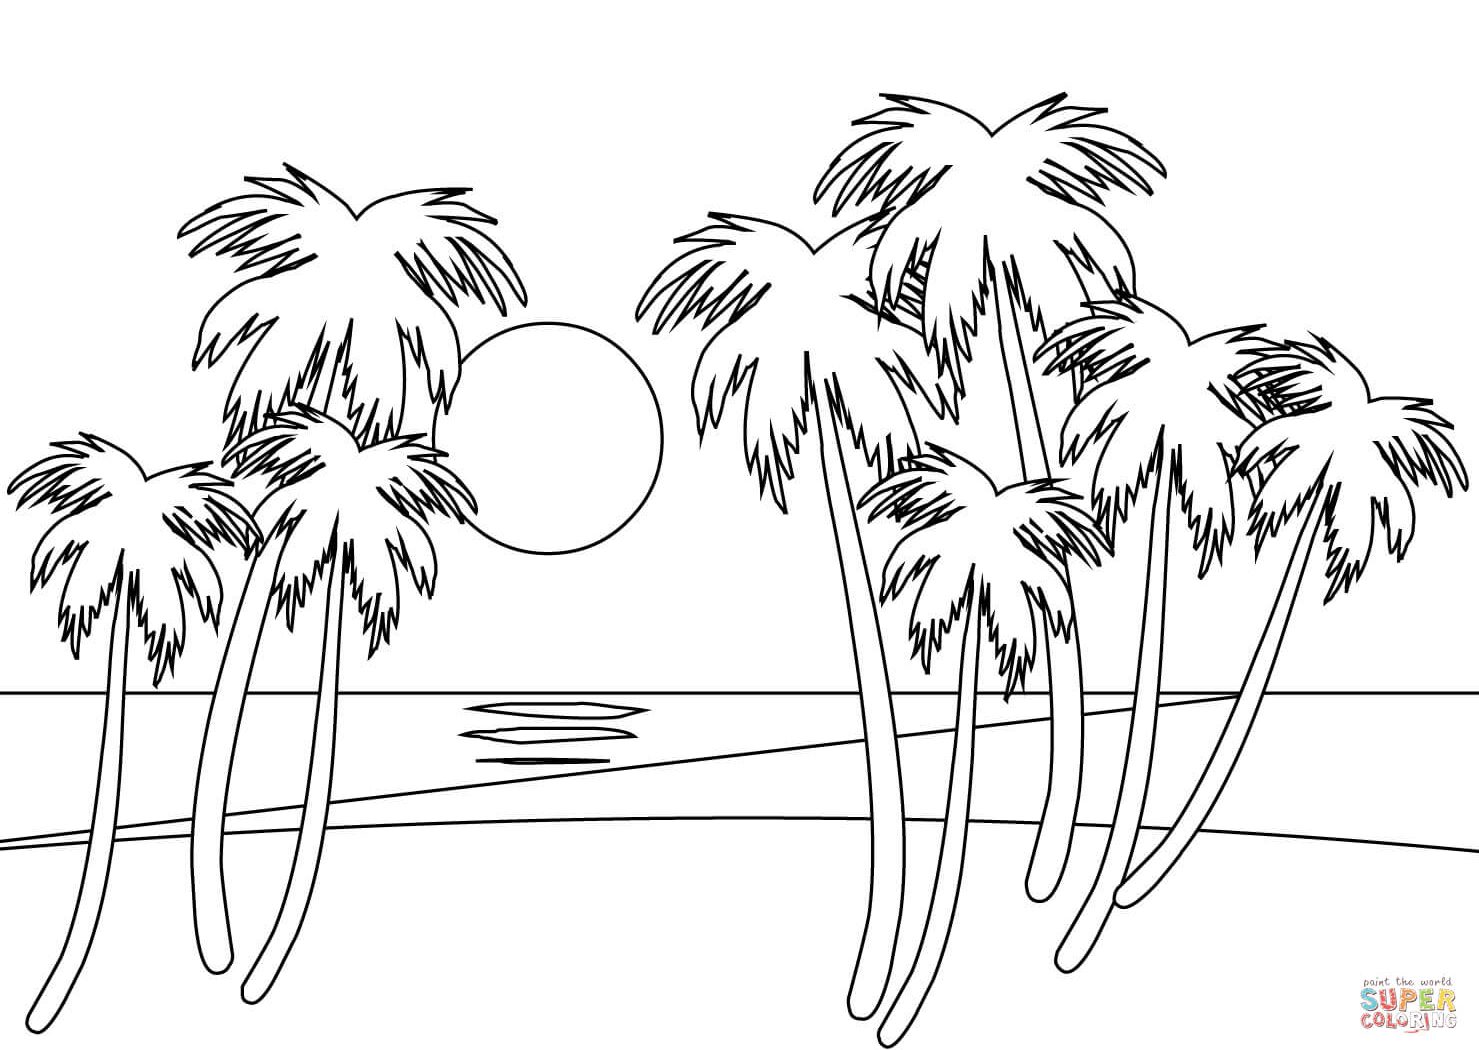 Beach Theme Coloring Pages At Getcolorings.com | Free Printable